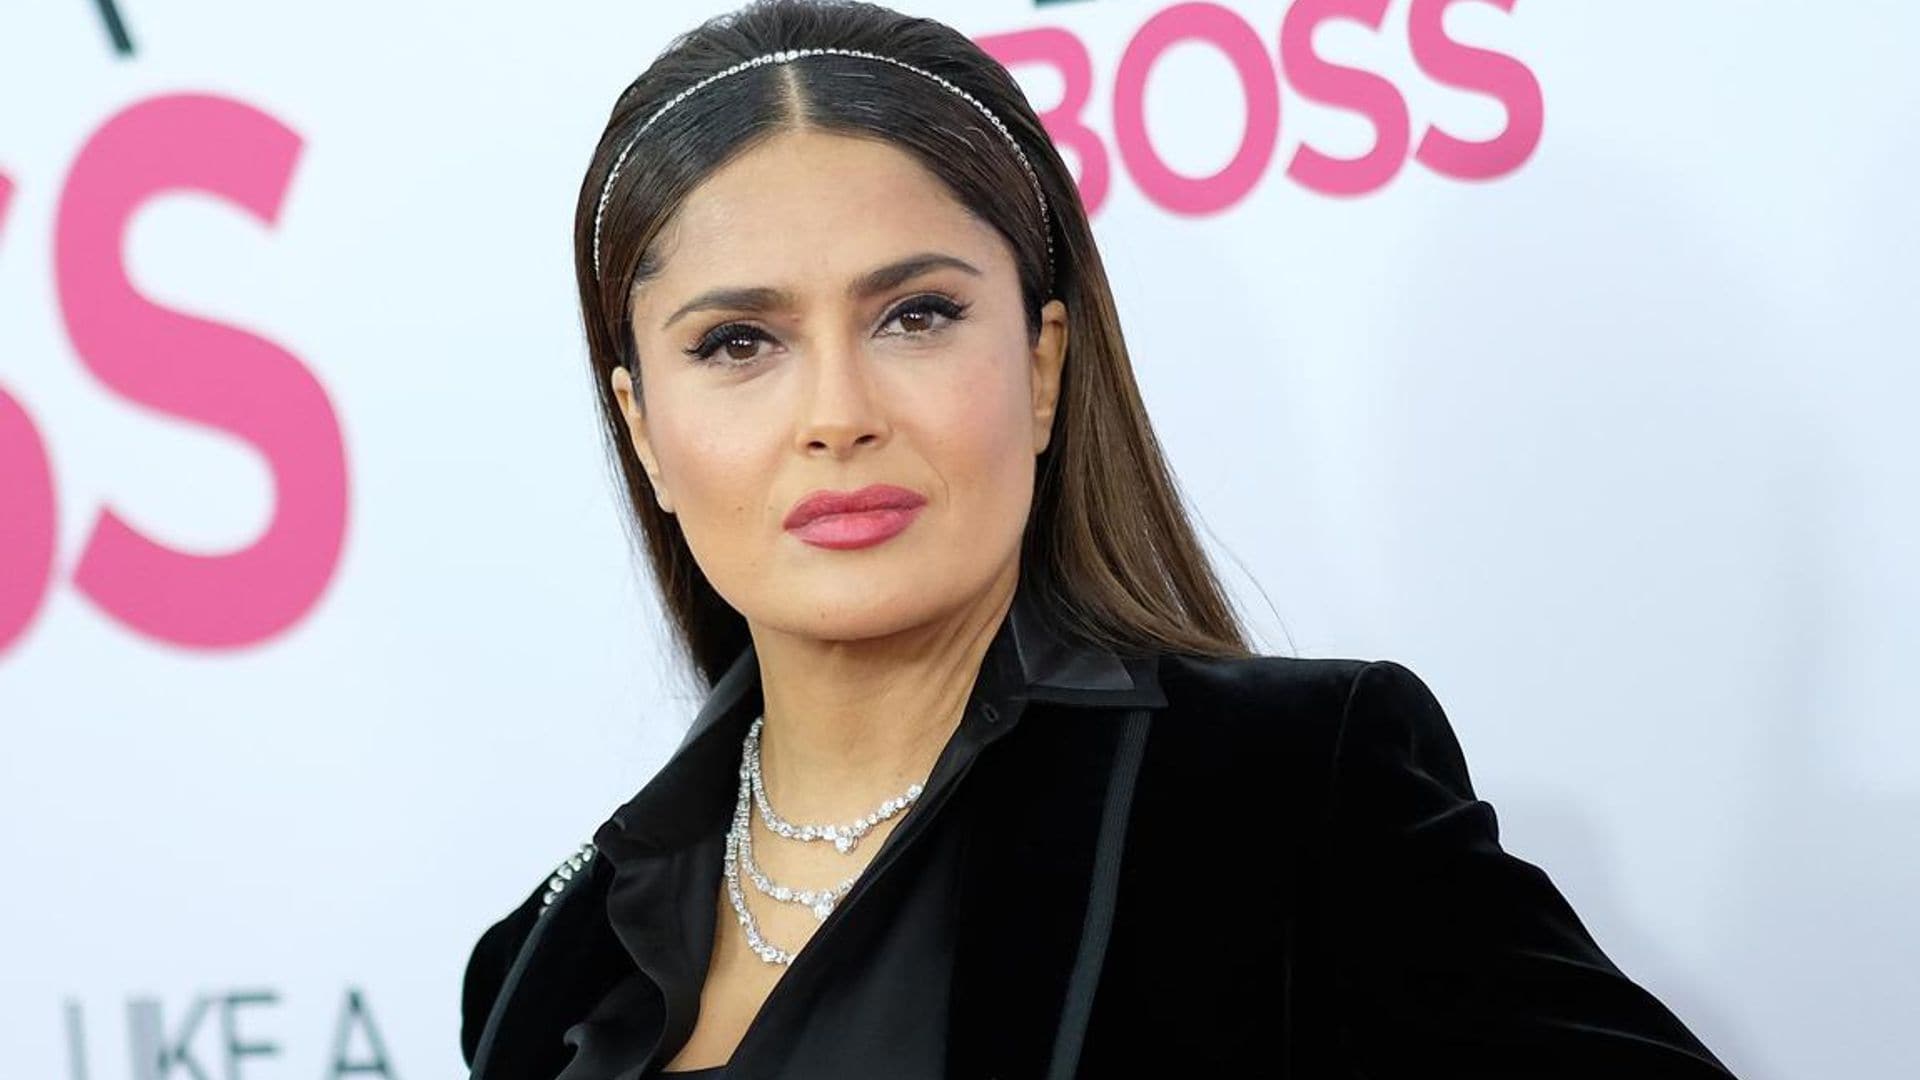 Salma Hayek apologizes to fans after controversial post